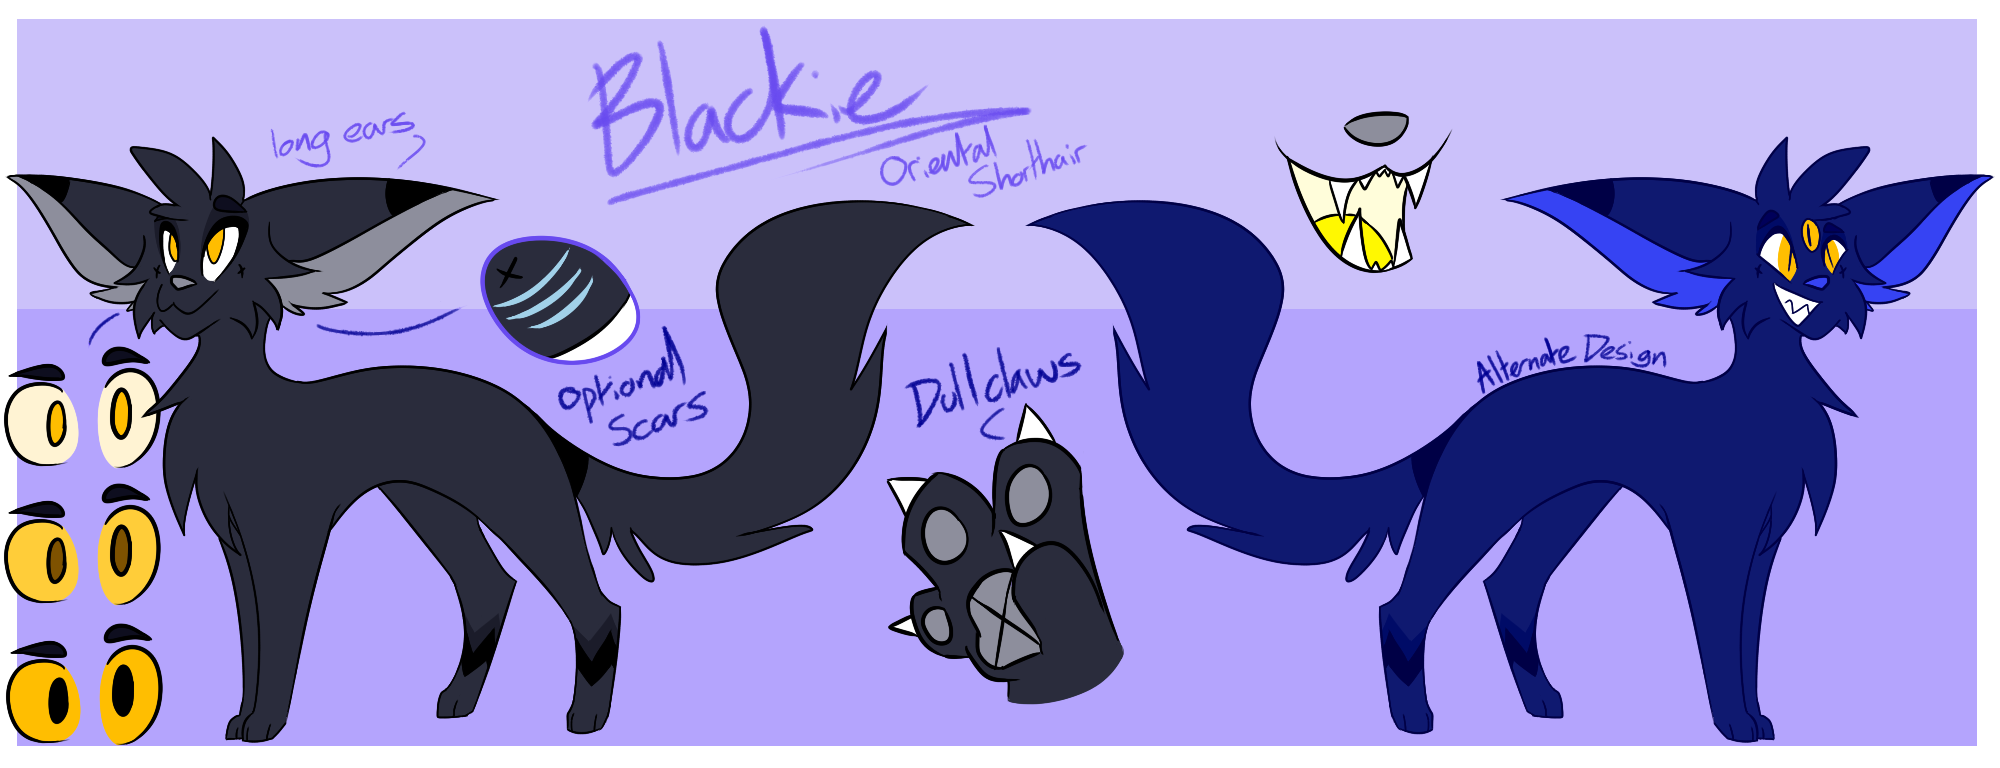 Blackie Reference by Angeli.